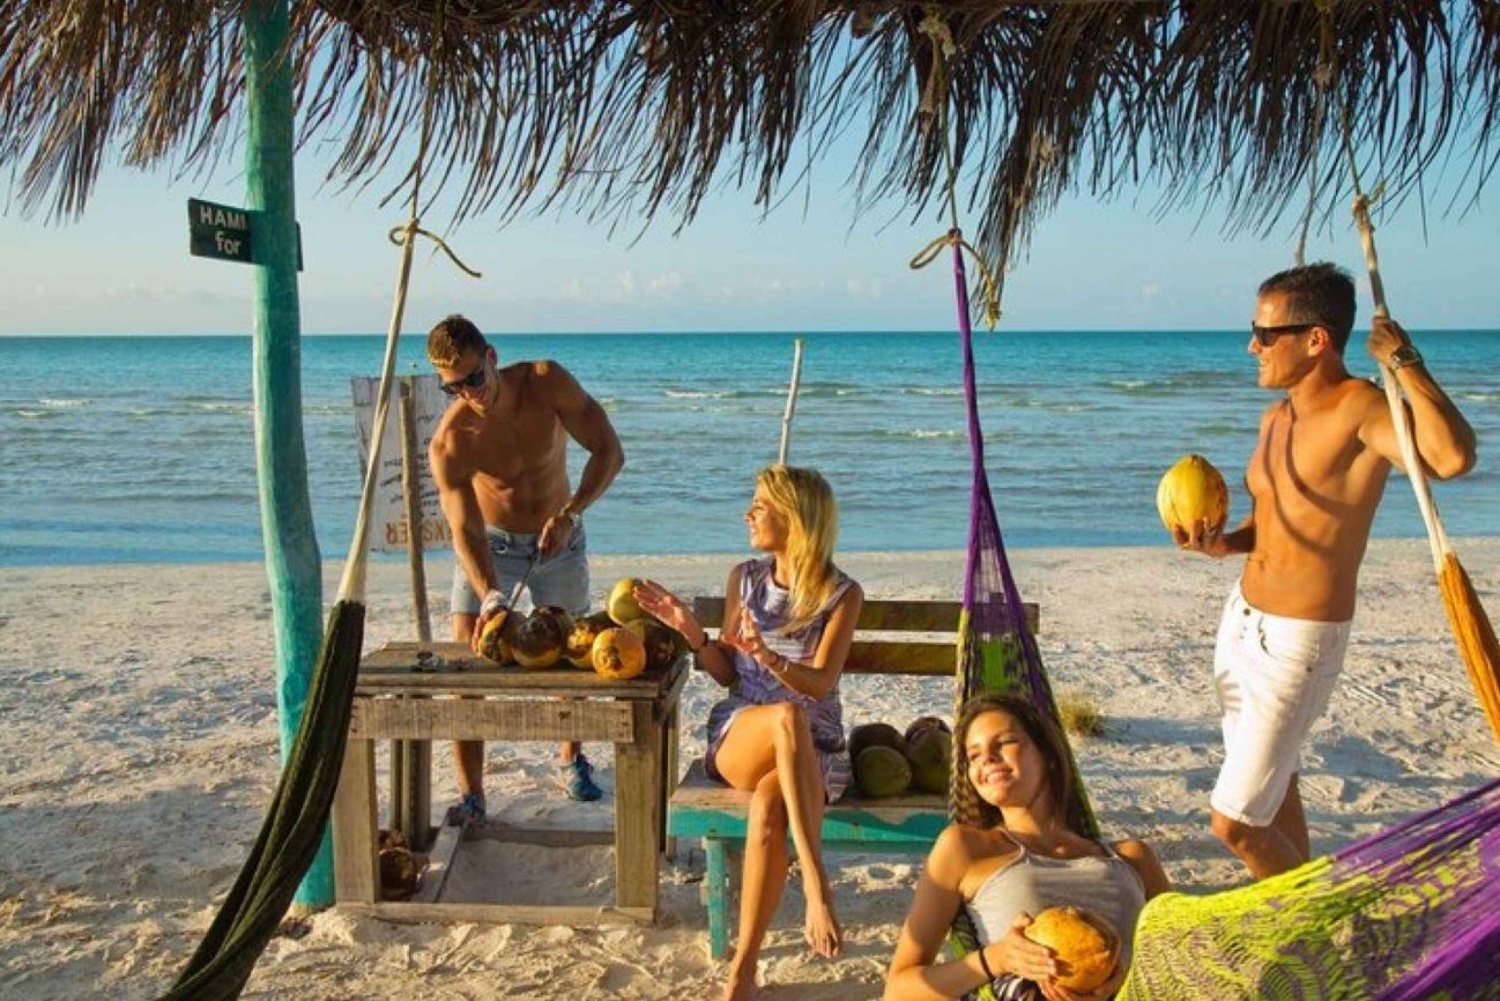 Holbox Tour from Cancun and Tulum with Boat Included